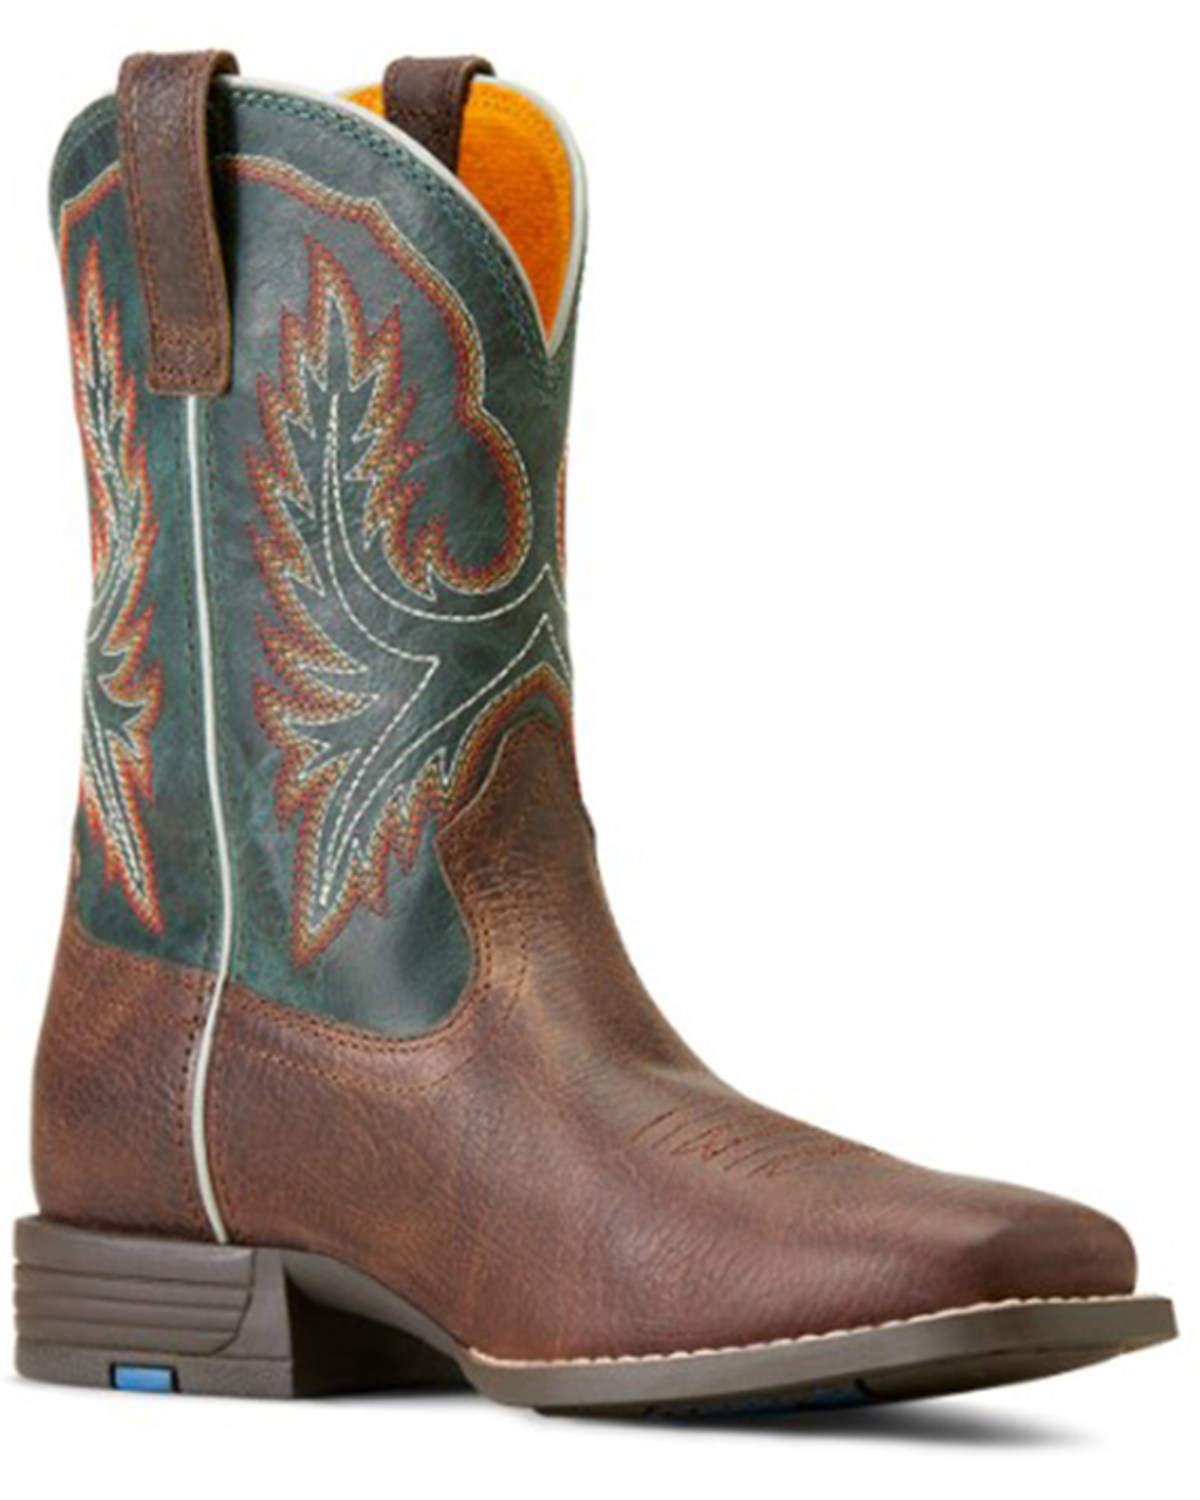 Ariat Boys' Wilder Western Boots - Broad Square Toe